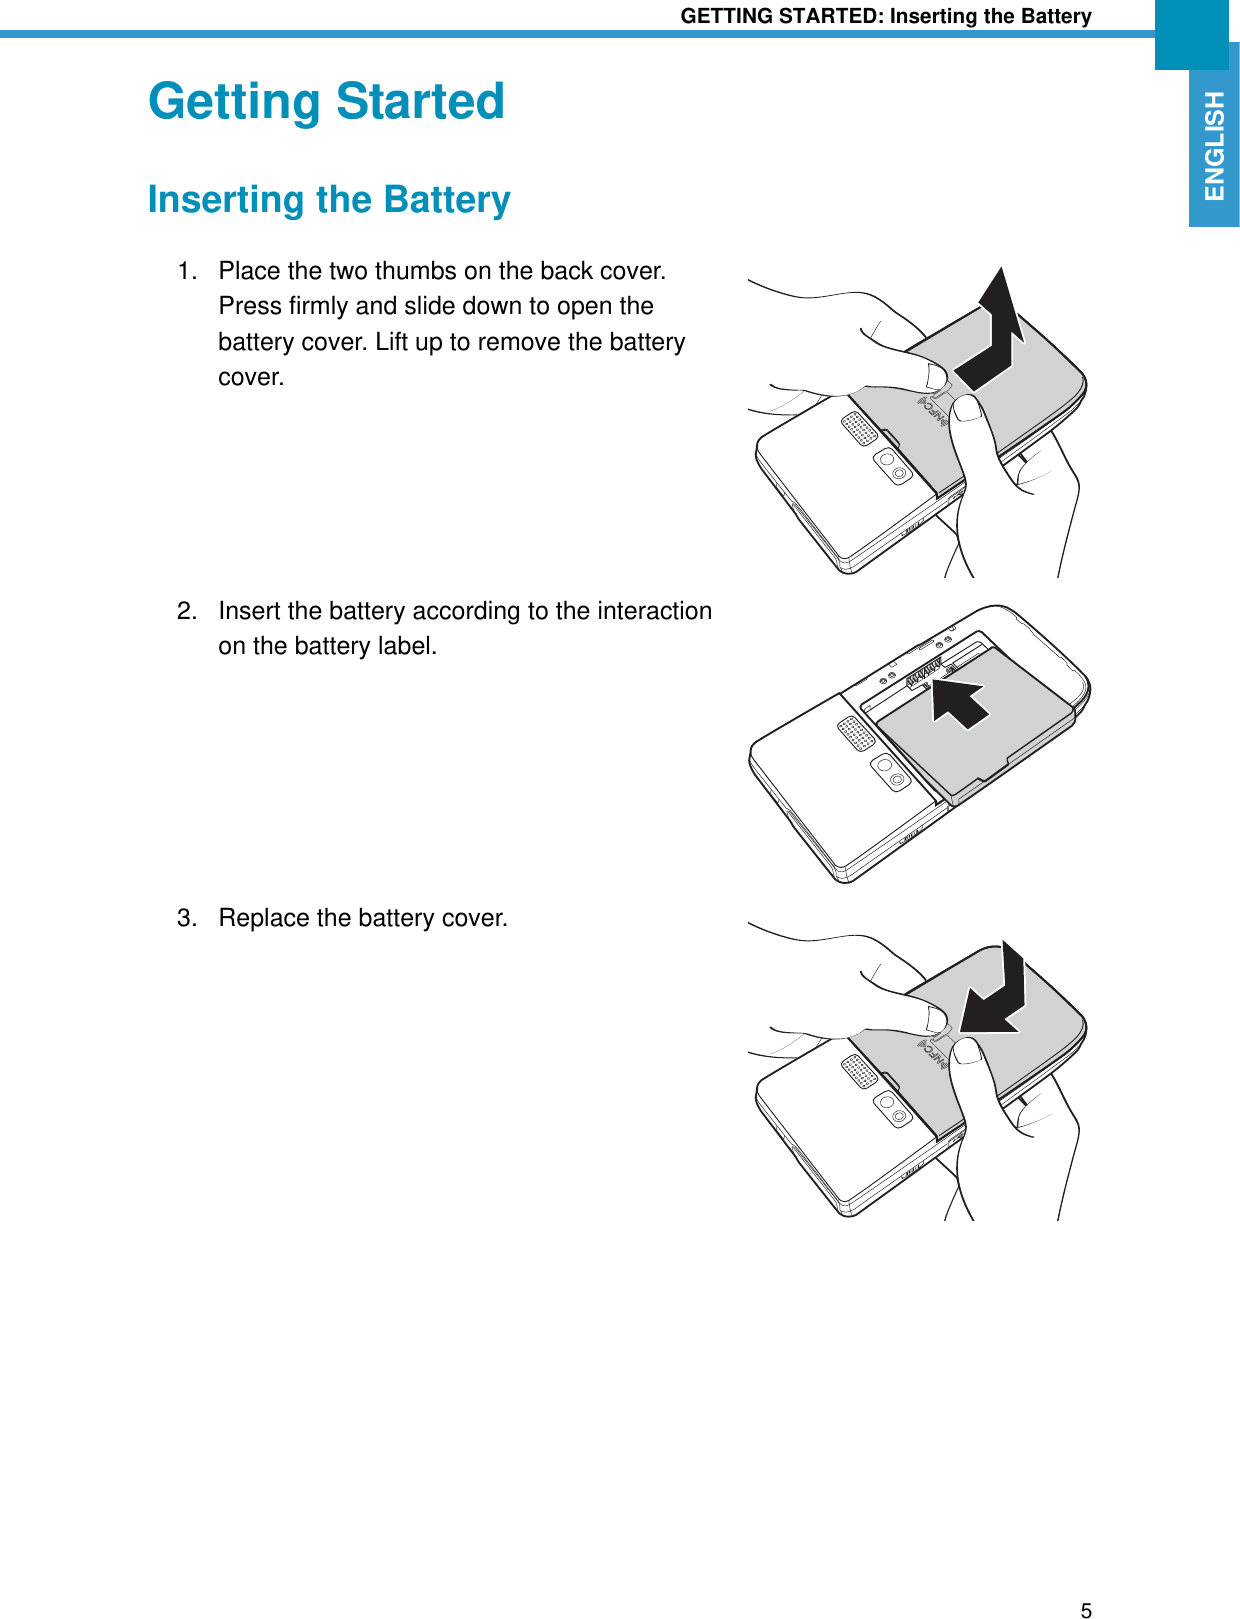 GETTING STARTED: Inserting the Battery5ENGLISHGetting StartedInserting the Battery1. Place the two thumbs on the back cover. Press firmly and slide down to open the battery cover. Lift up to remove the battery cover.2. Insert the battery according to the interaction on the battery label.3. Replace the battery cover.